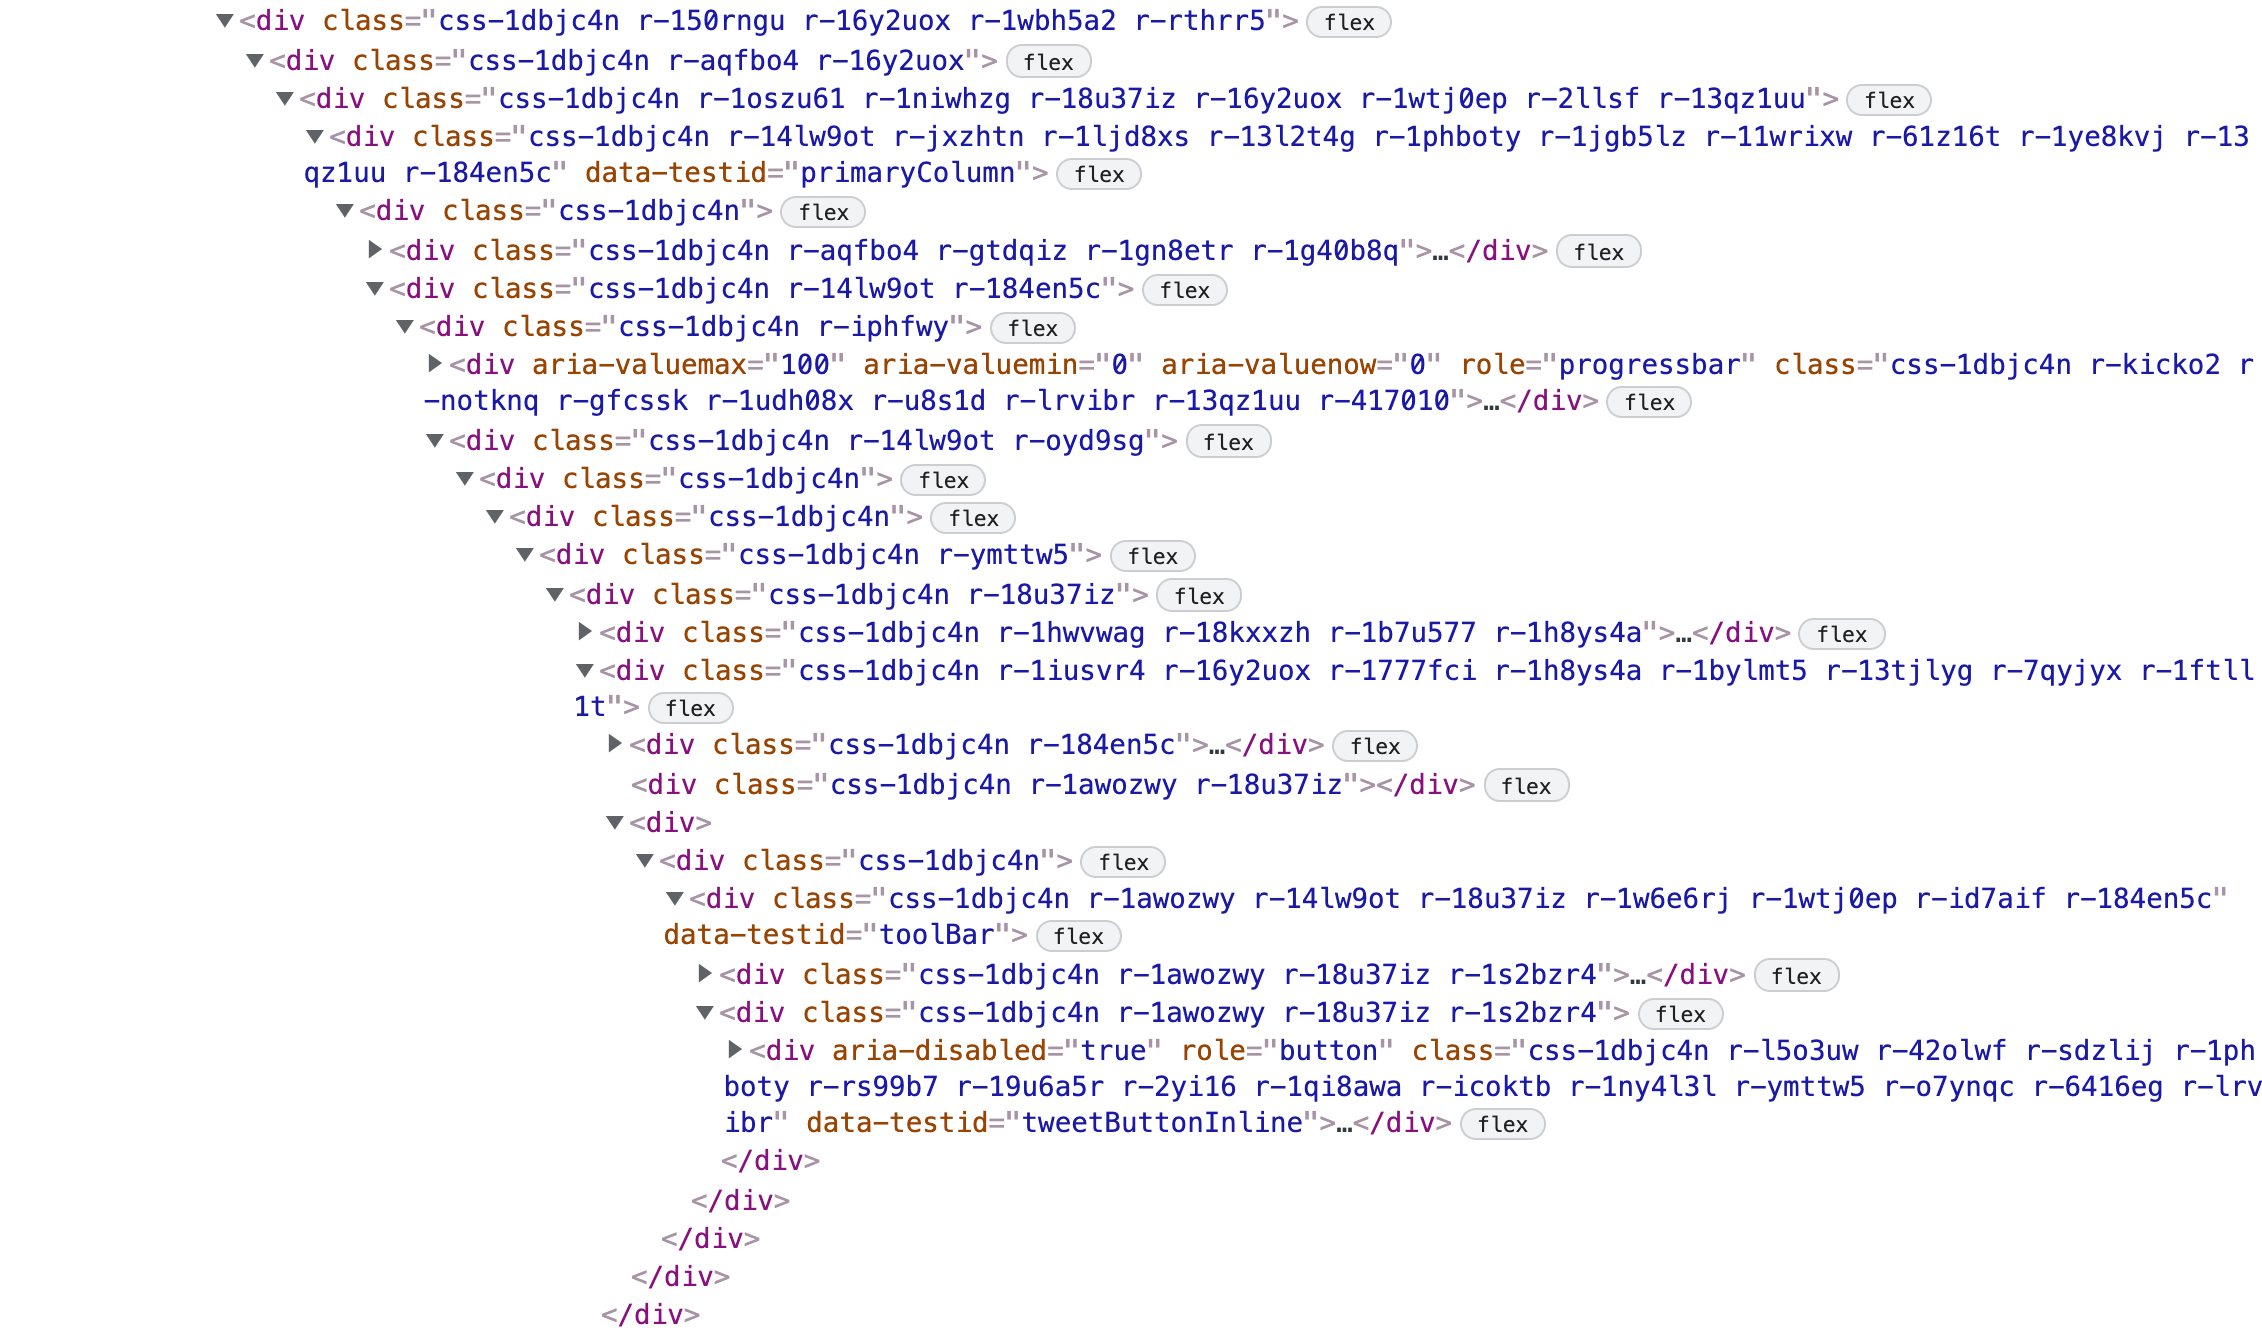 DevTools looking at the DOM on twitter.com: tons of divs with obfuscated class names.